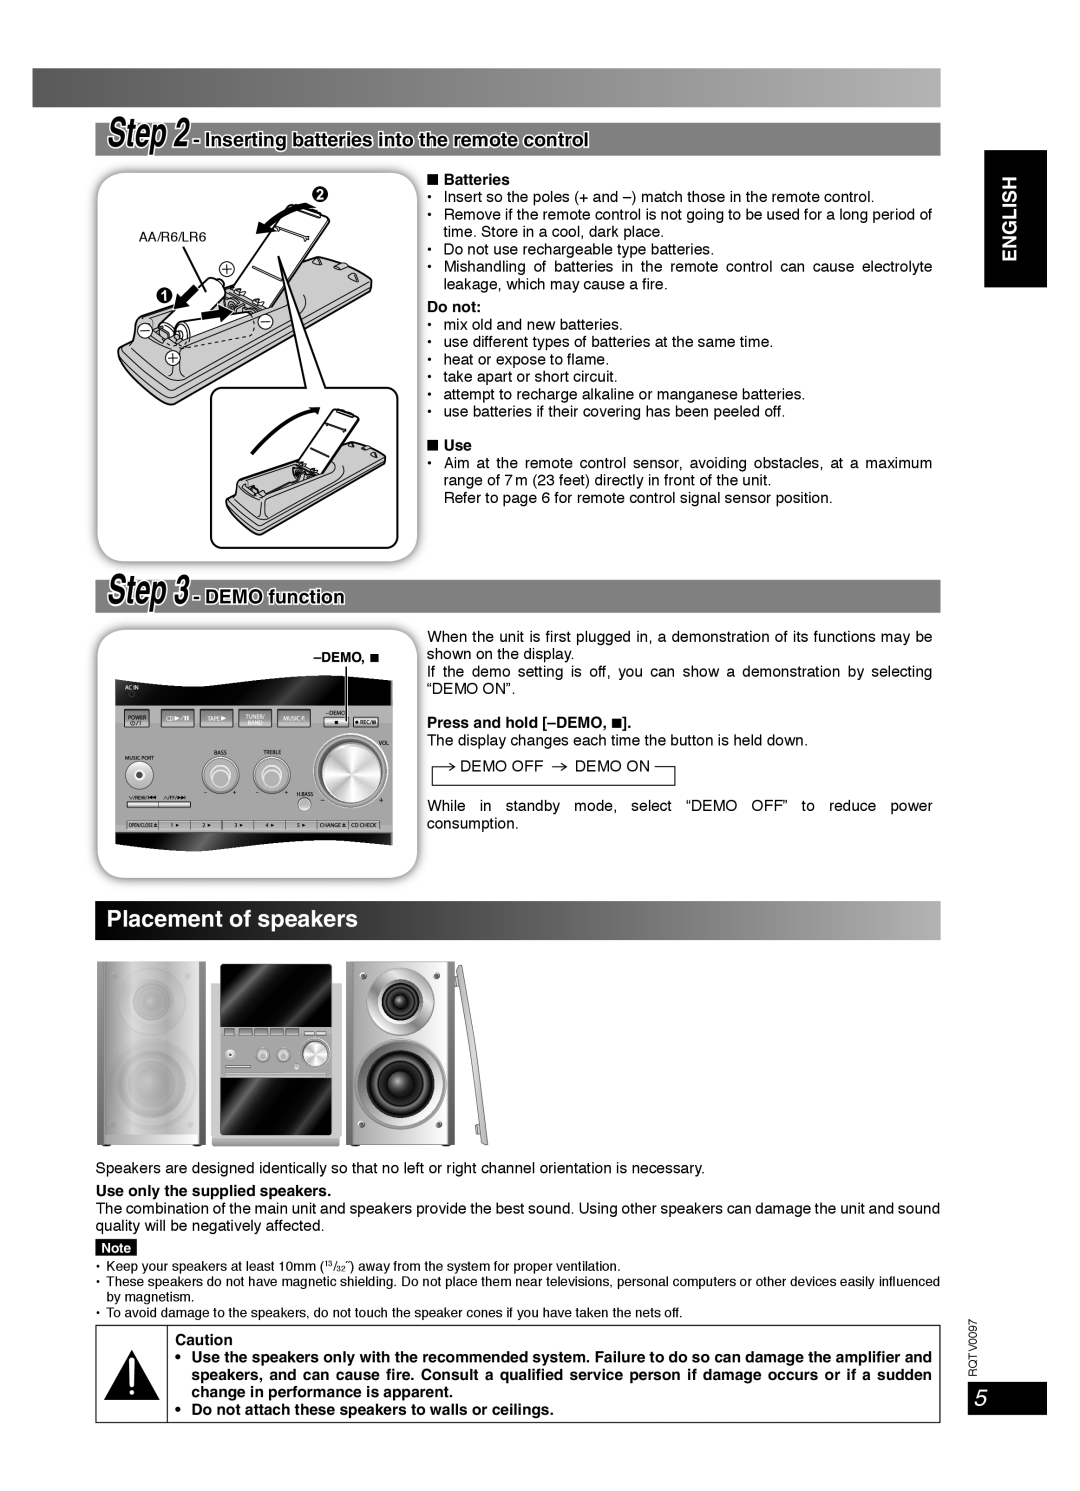 Panasonic SC-PM53, RQTV0097-2P, SCPM533 important safety instructions Placement of speakers, DEMO function, English 